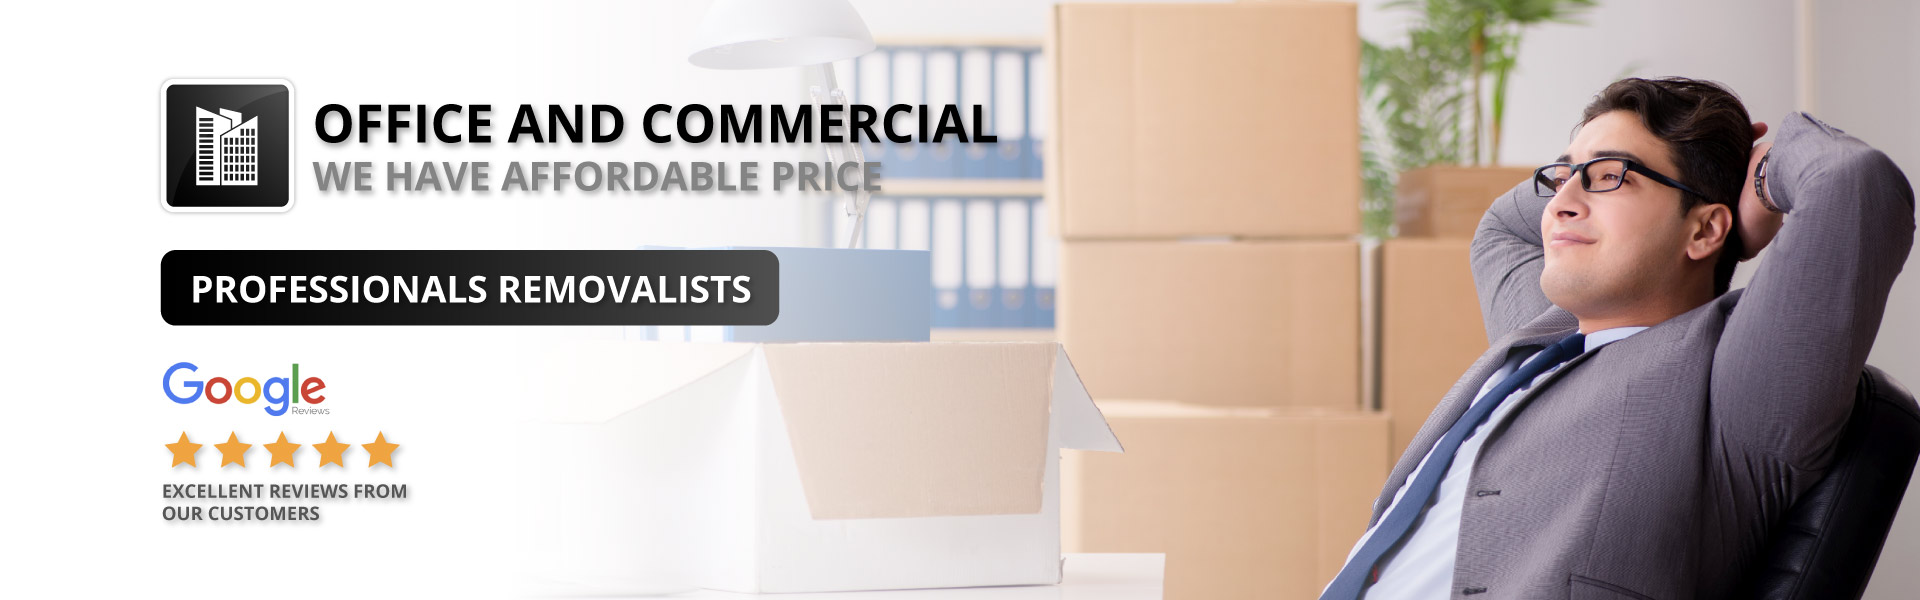 Removalists in Sydney - Fast Movers - Banner Top 12